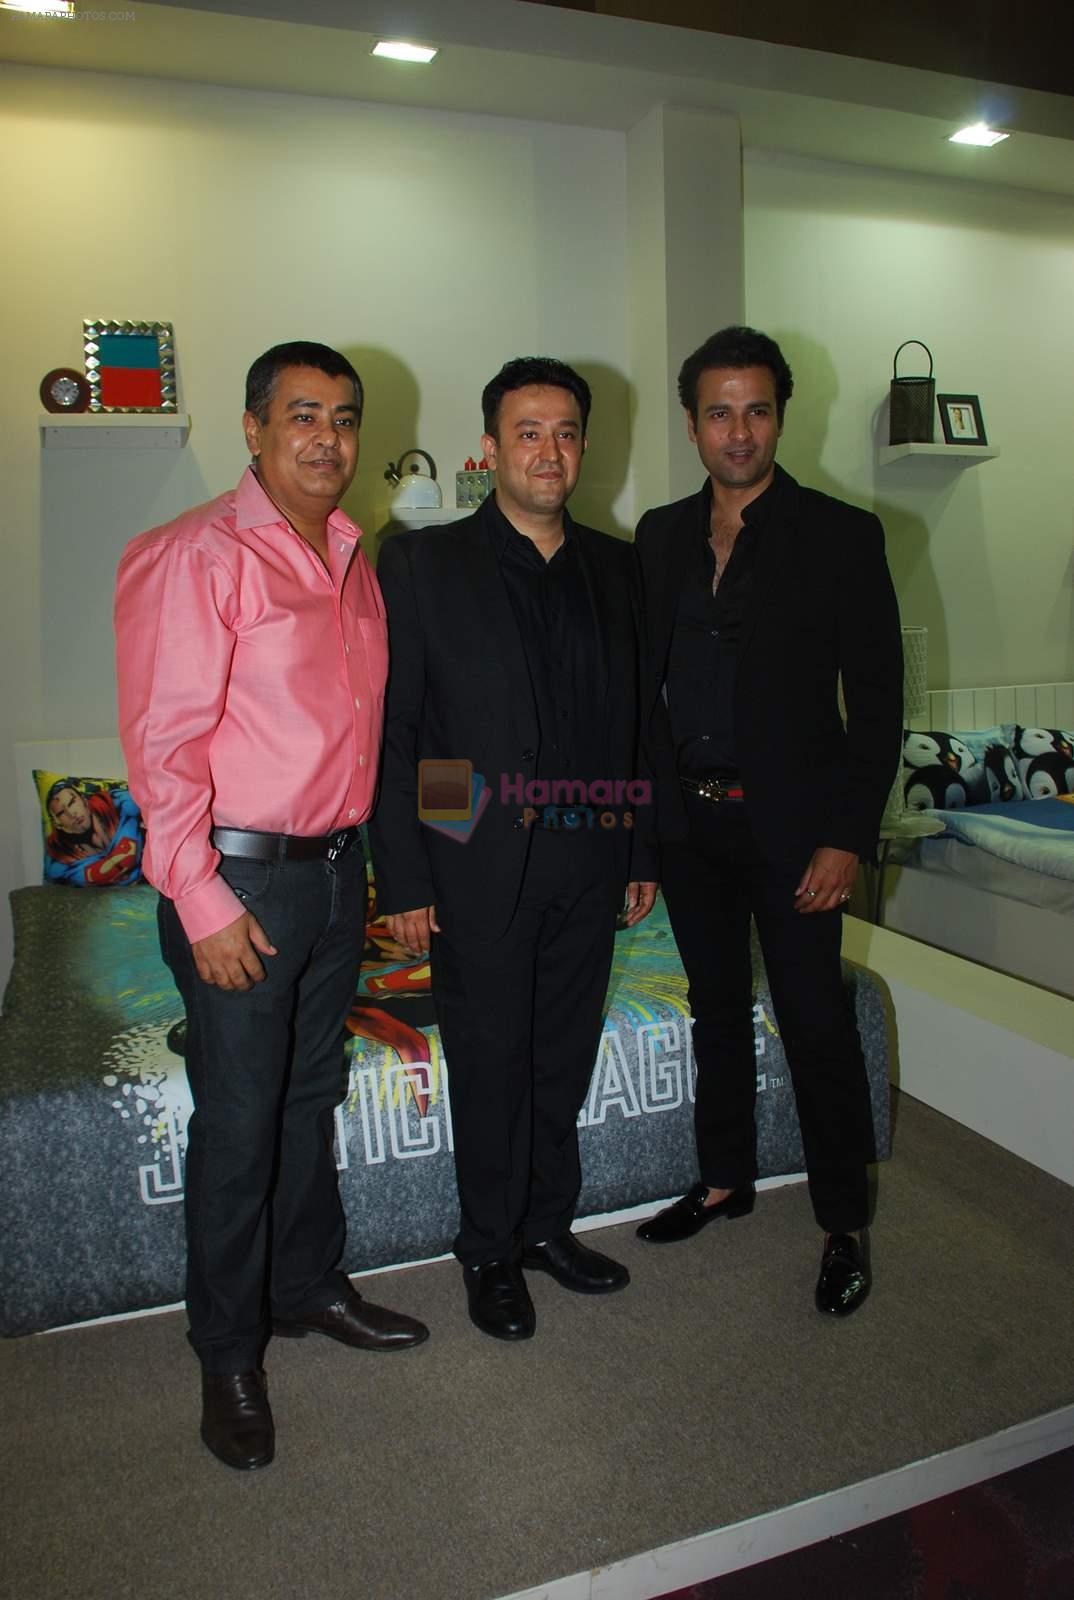 Rohit Roy at Dicitex launch in Westin on 21st April 2015